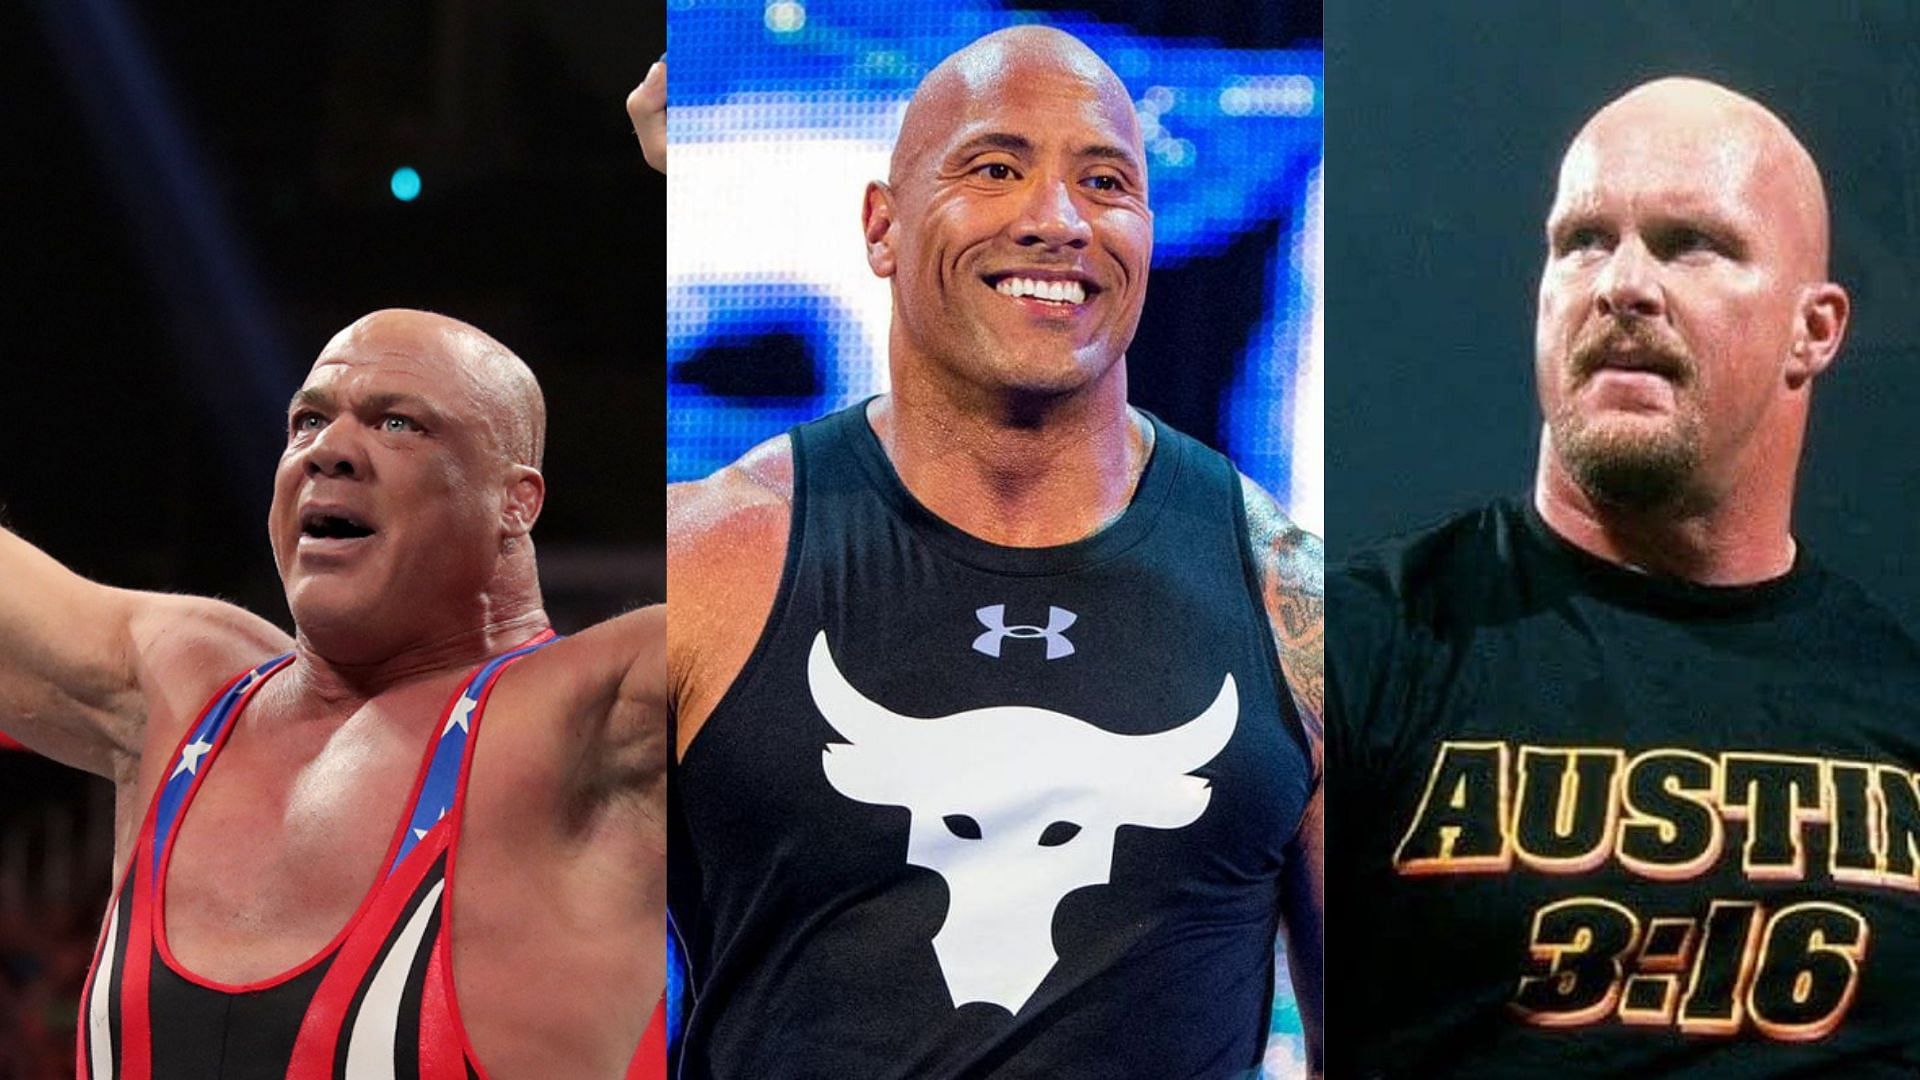 Kurt Angle (left); The Rock (middle); Stone Cold (right)